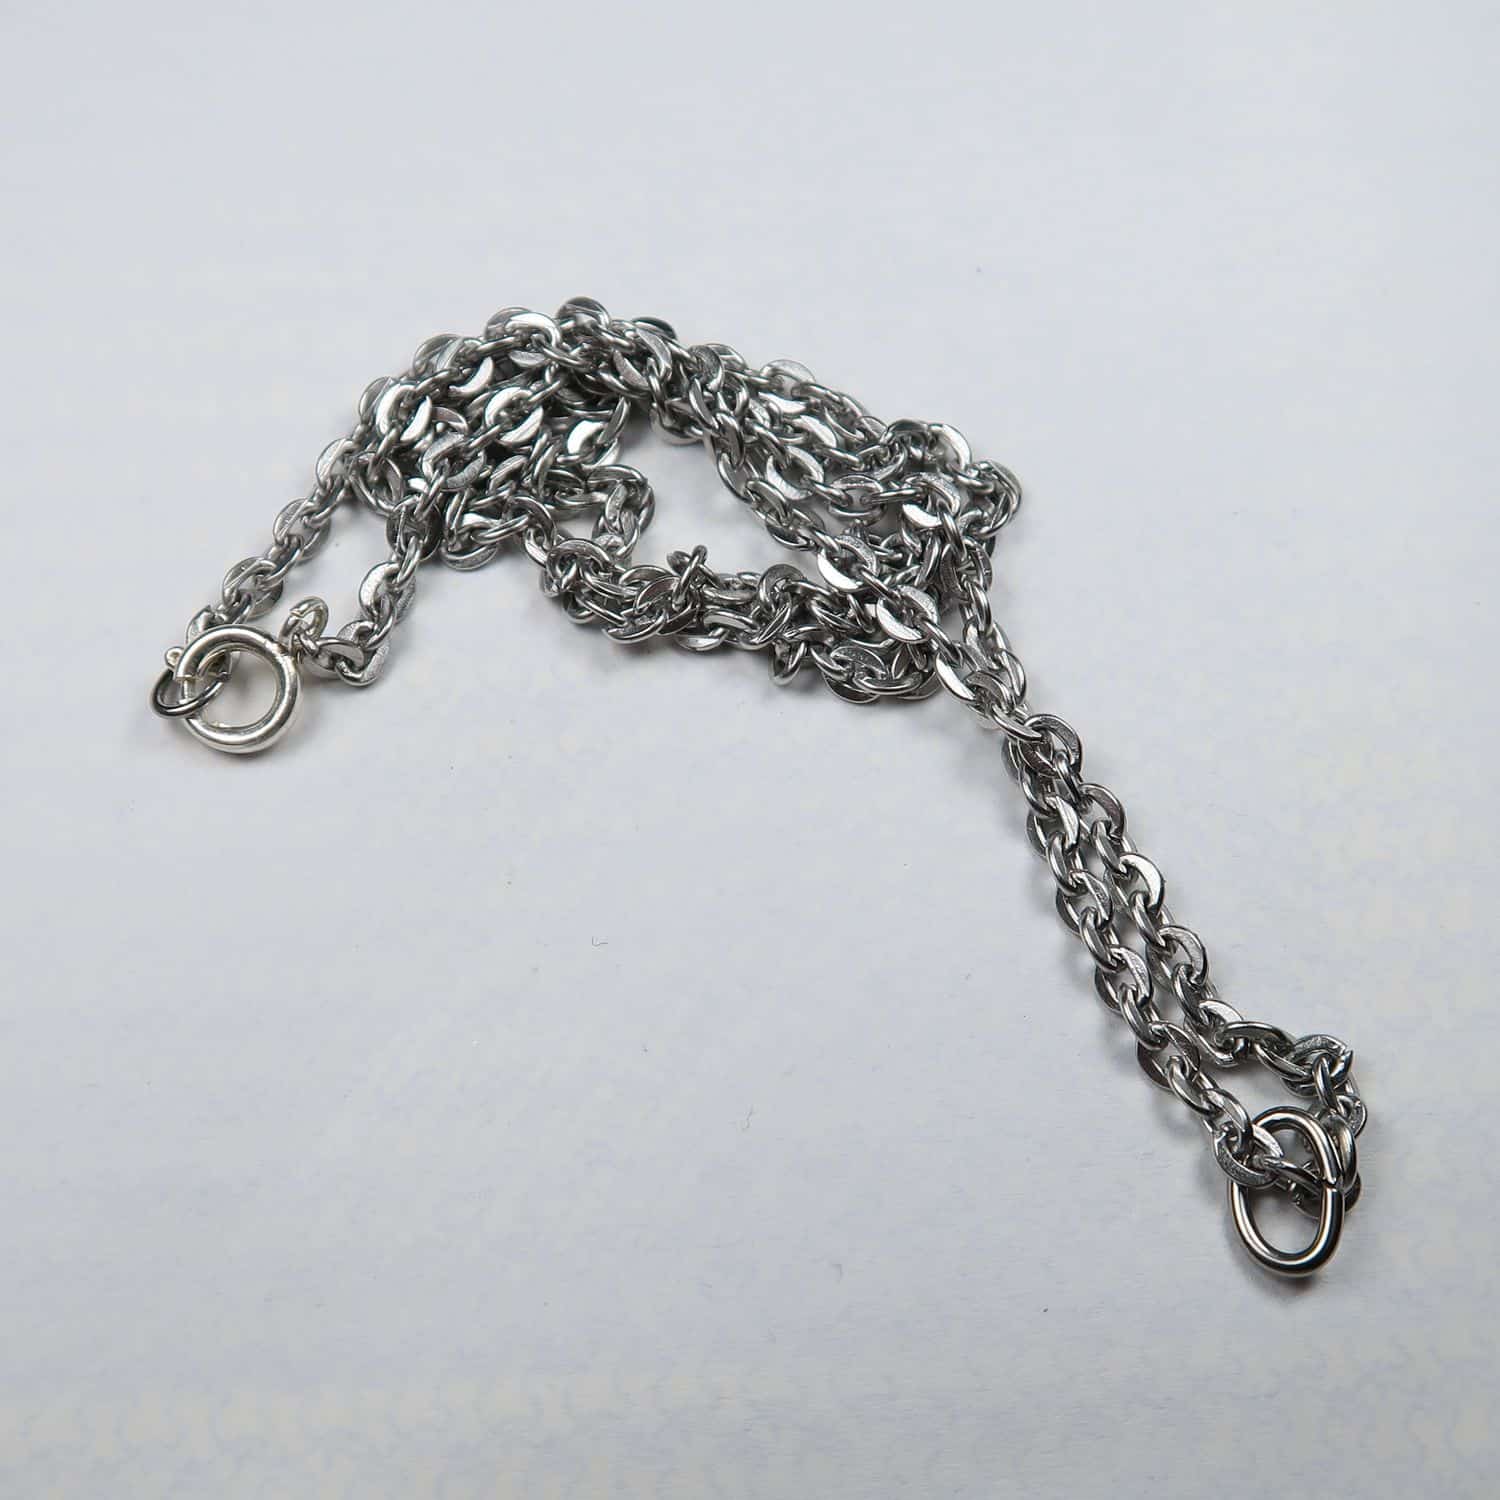 Finished Chains for Jewellery Makers | Buy Chains Online UK